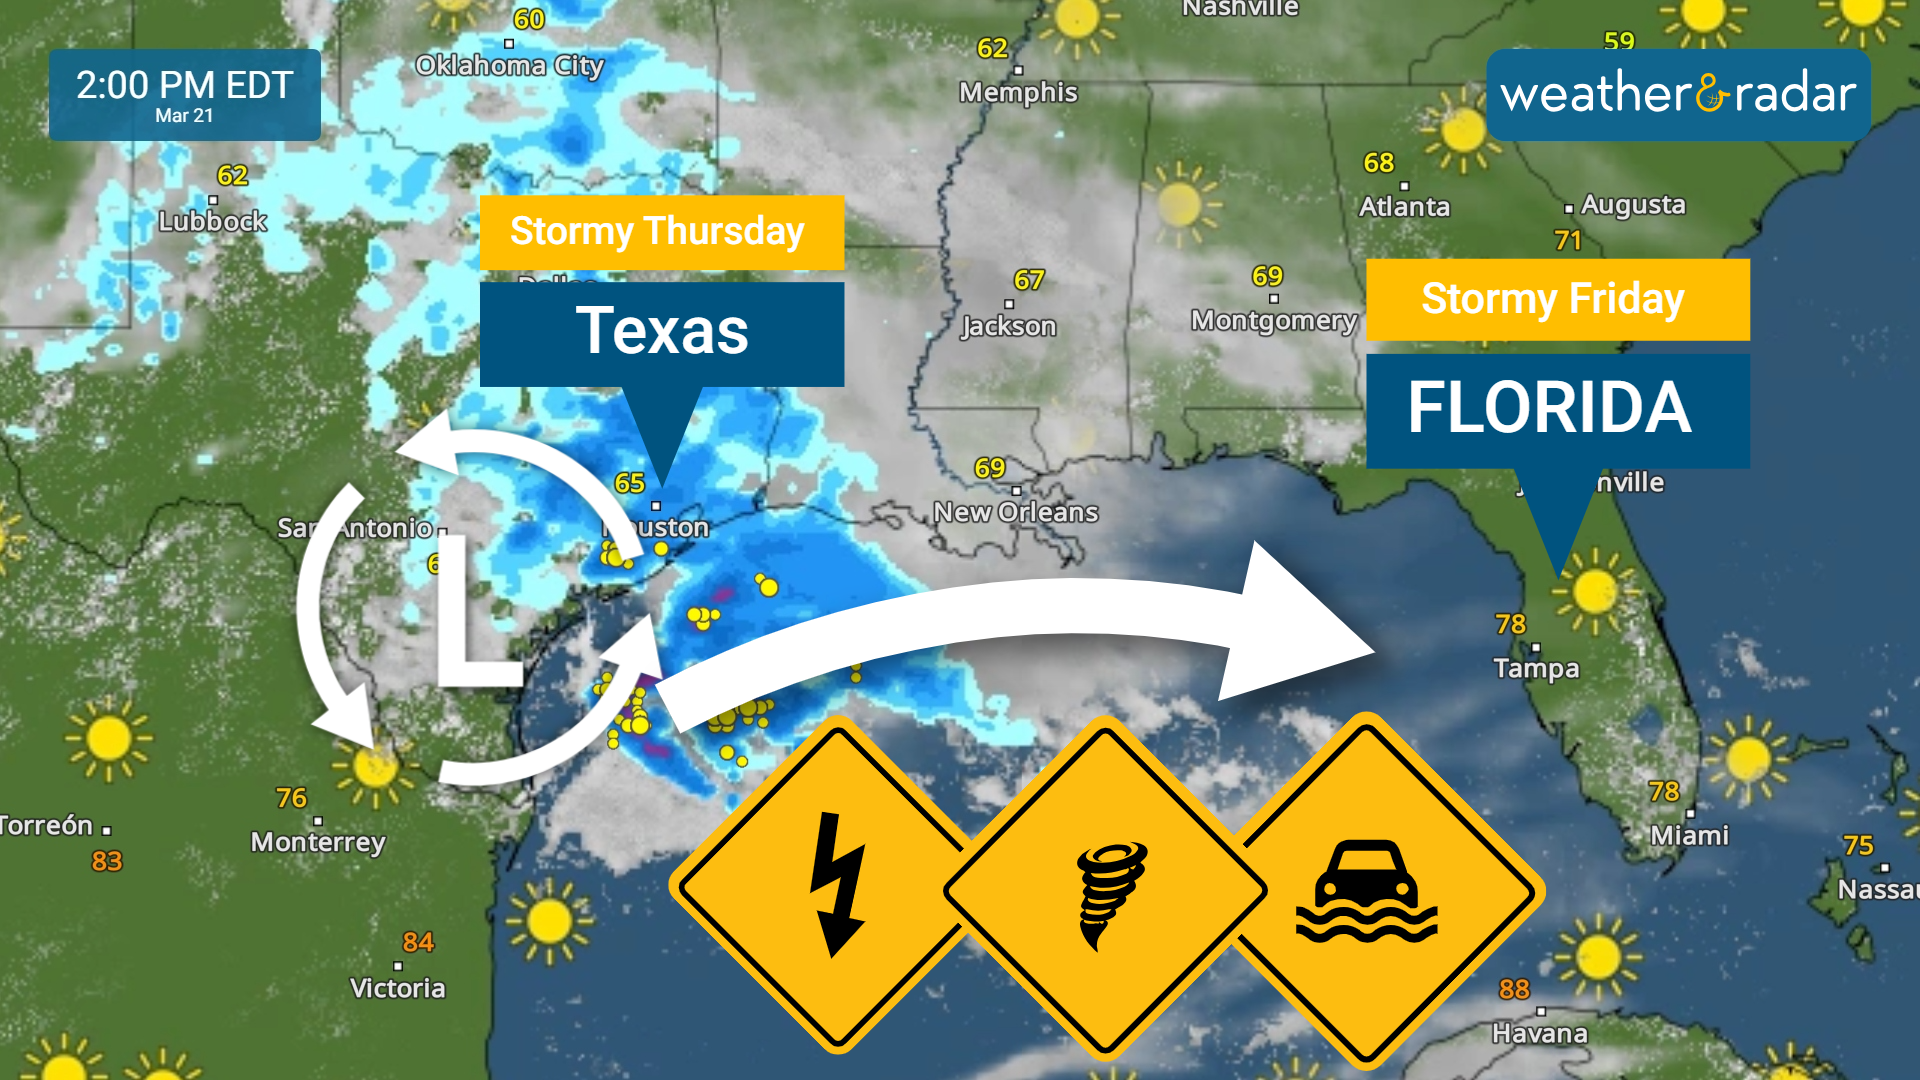 Strong low pressure moves over South Texas on Thursday.